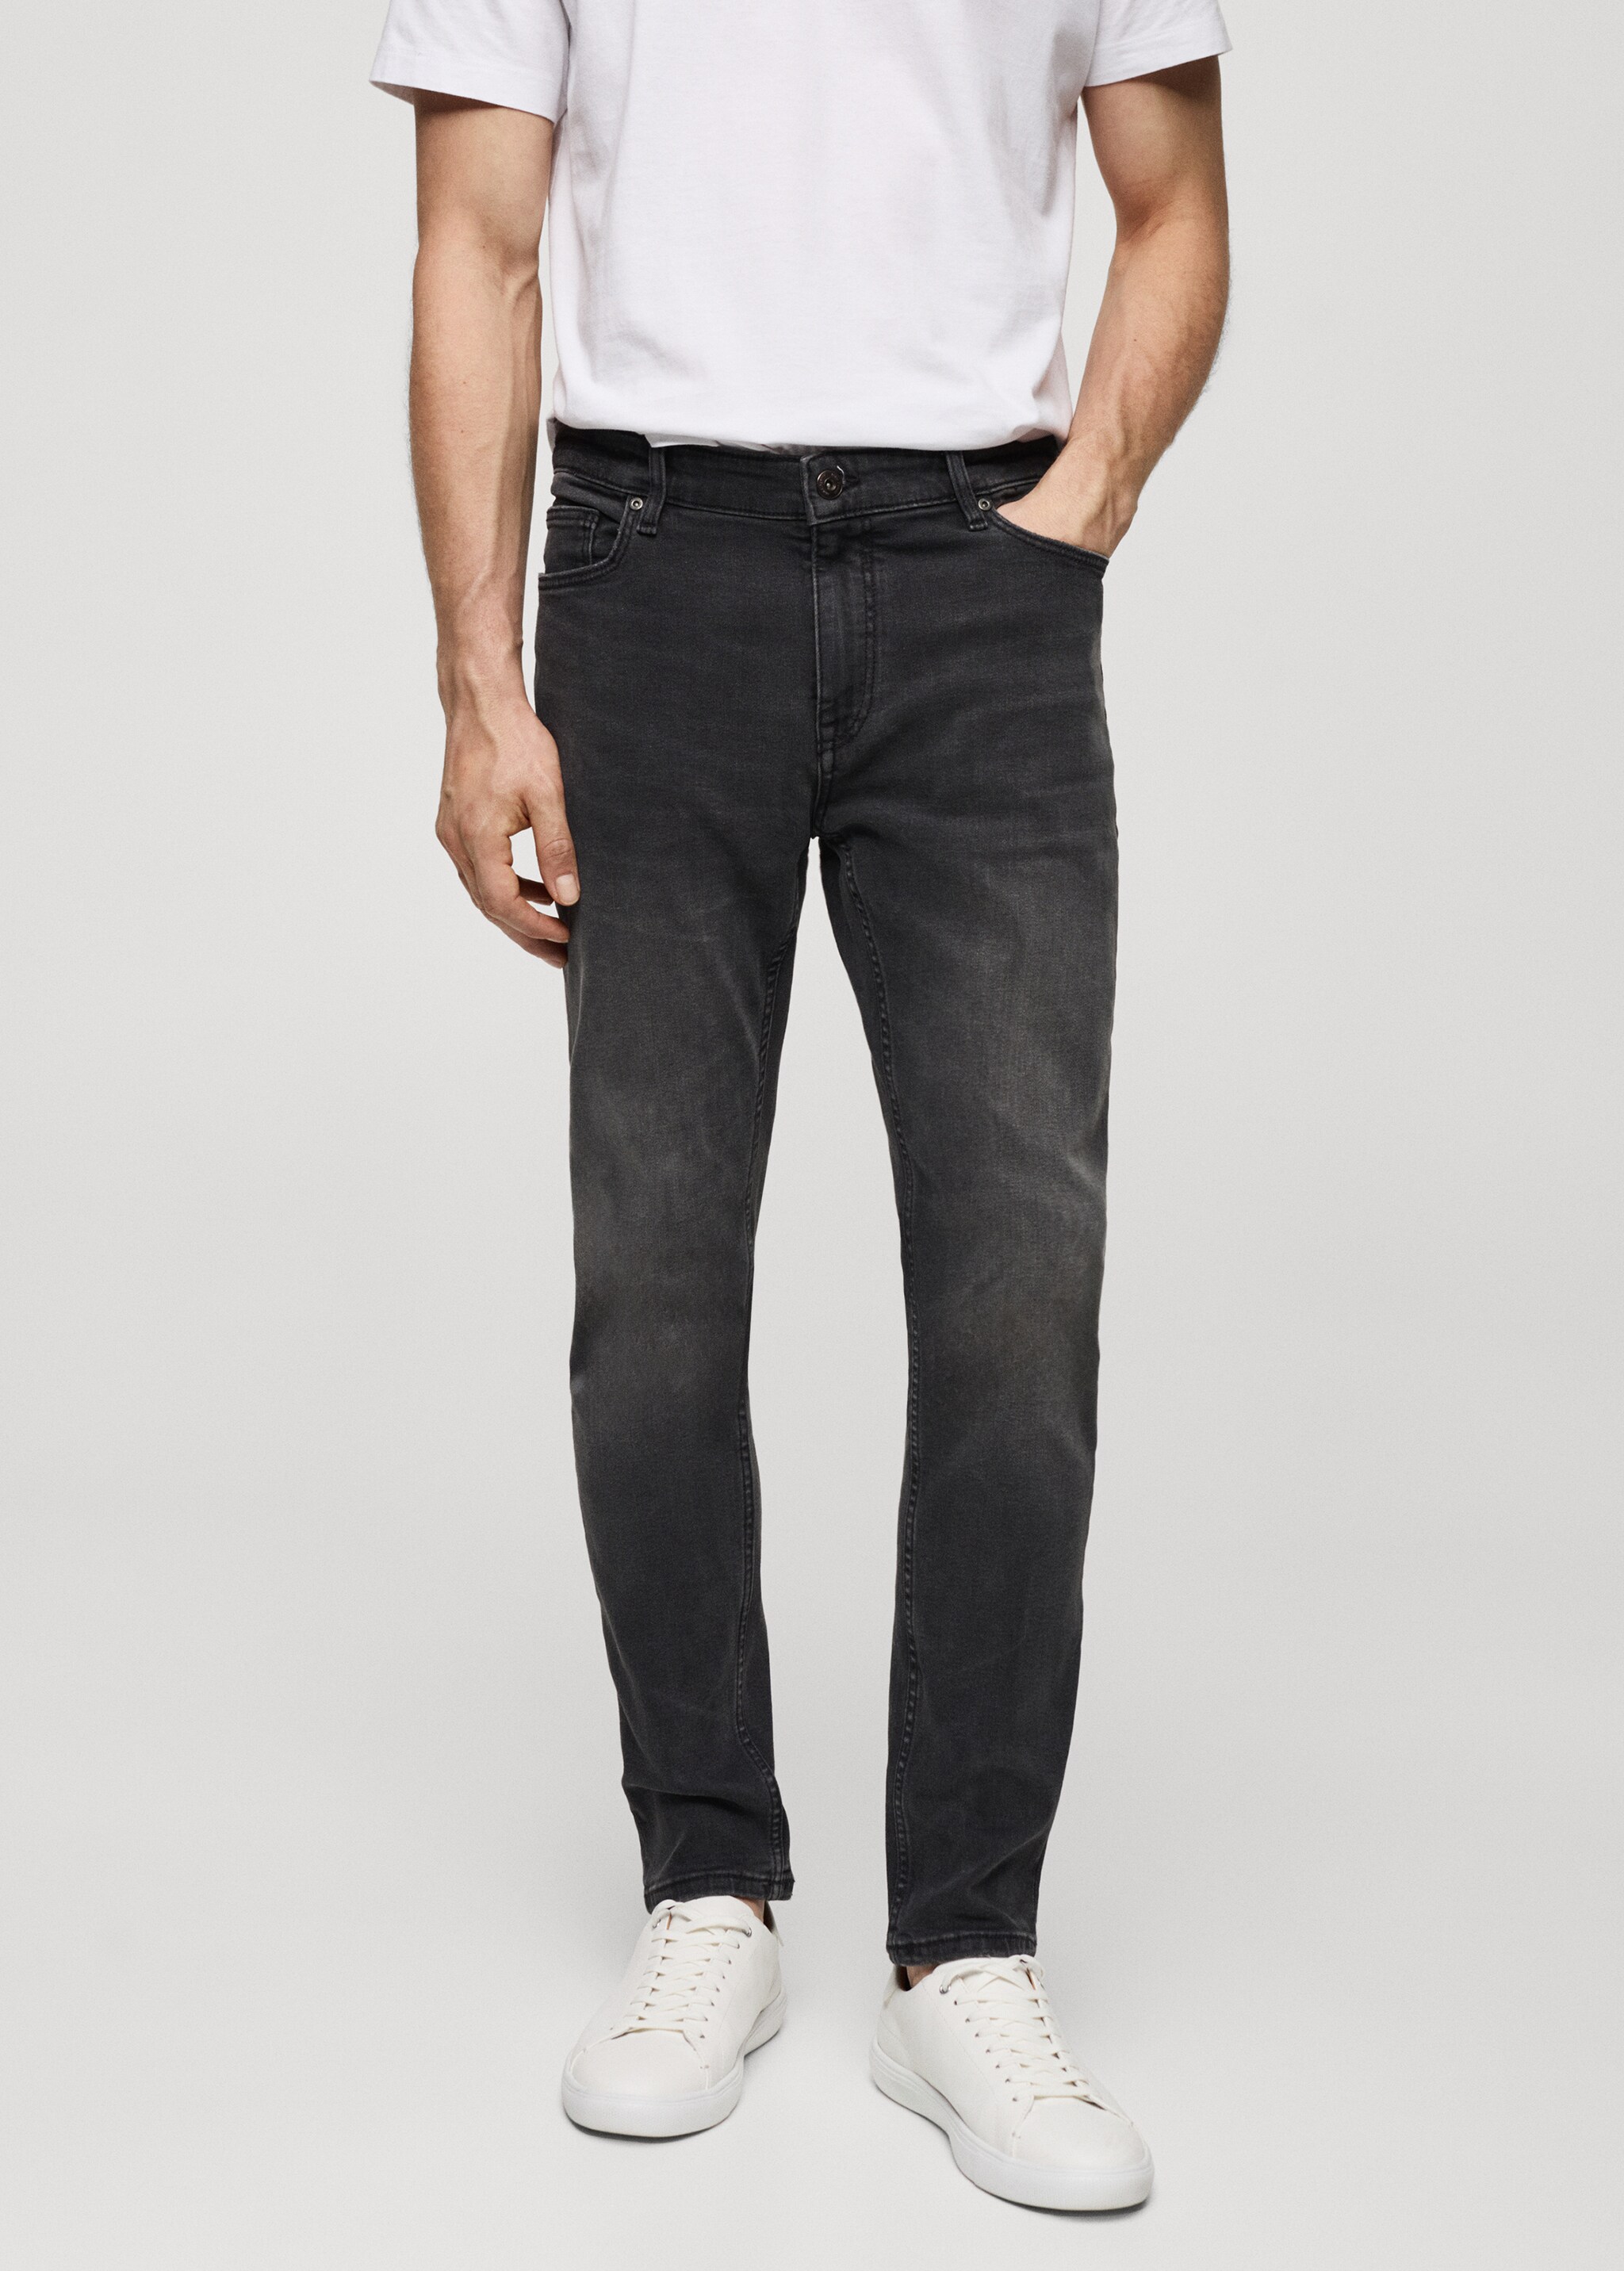 Jeans Jude skinny fit - Plano medio